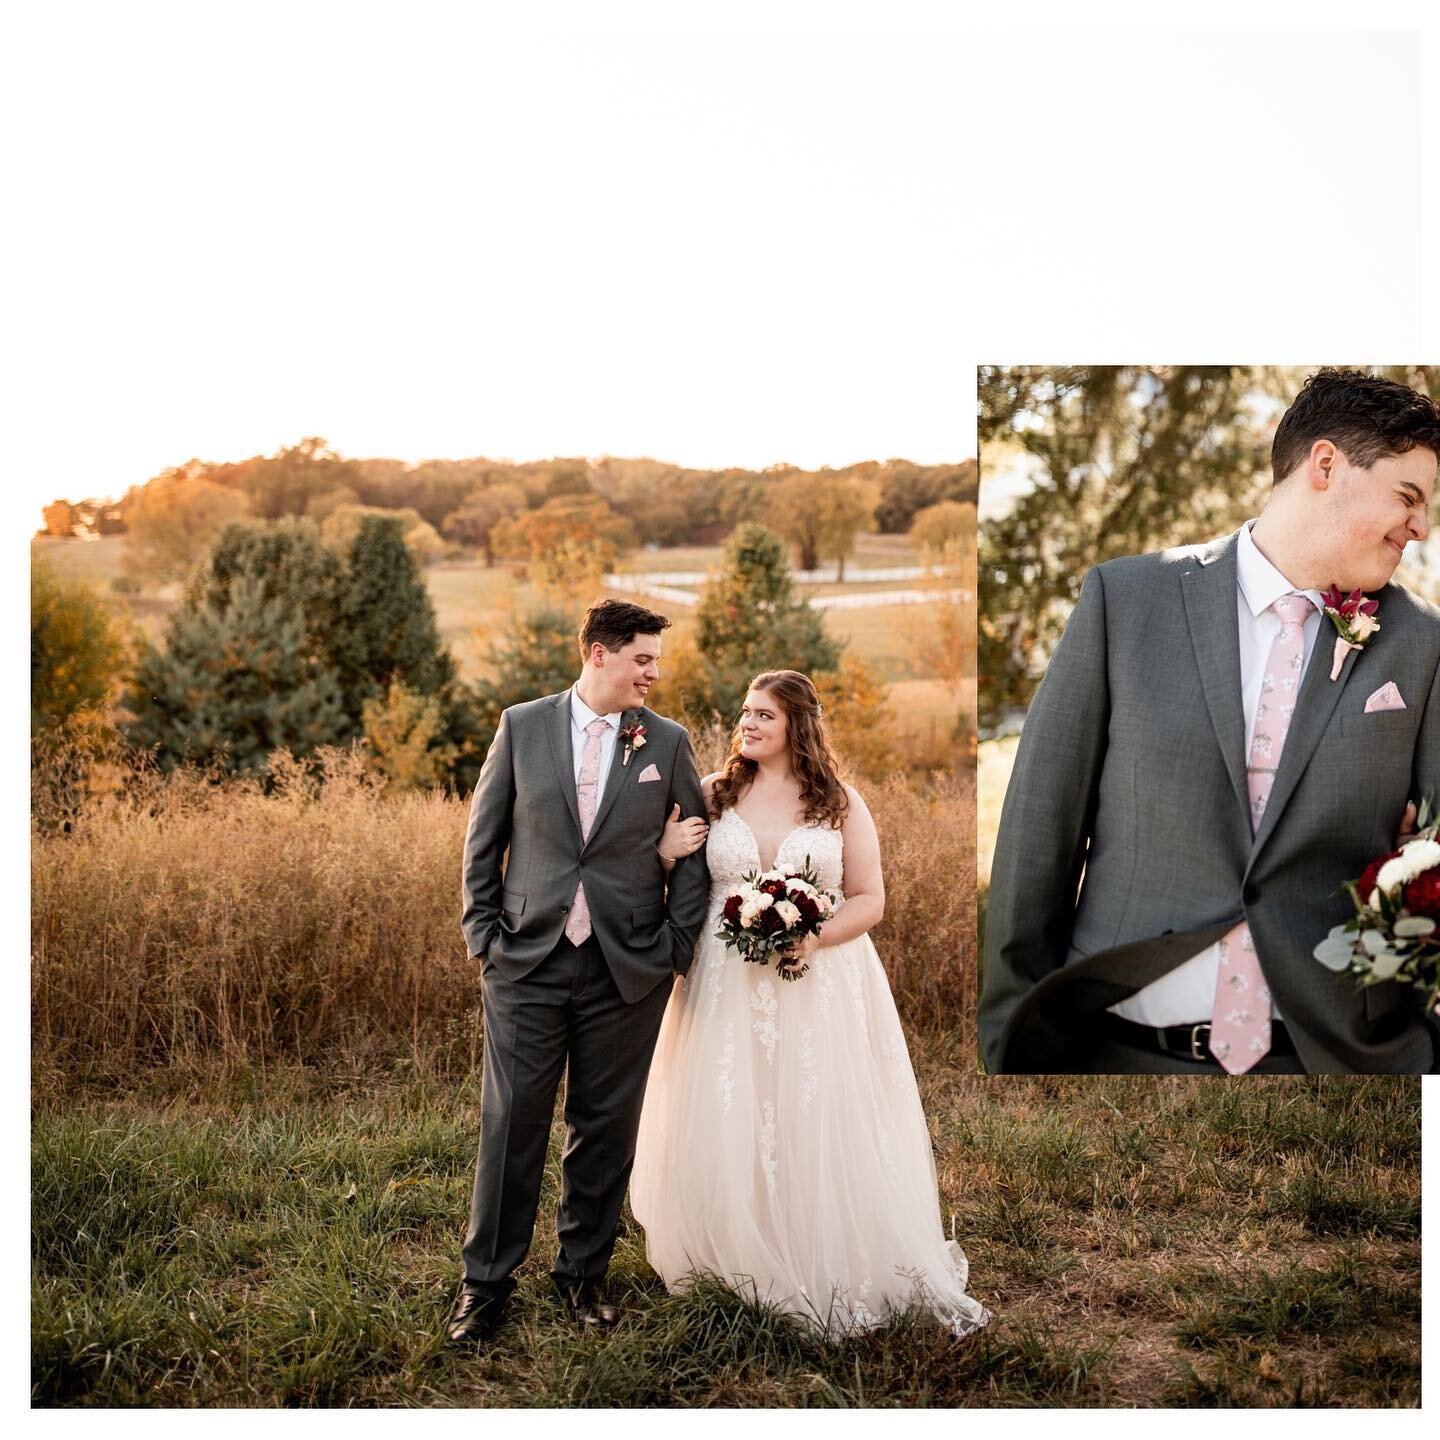 I love harvest / fall weddings. They are full of warmth, love, abundance, and so much joy. These two sweethearts were all that and more, I just loved their gentle spirits and all their family and friends that came to celebrate! I&rsquo;m a lucky phot